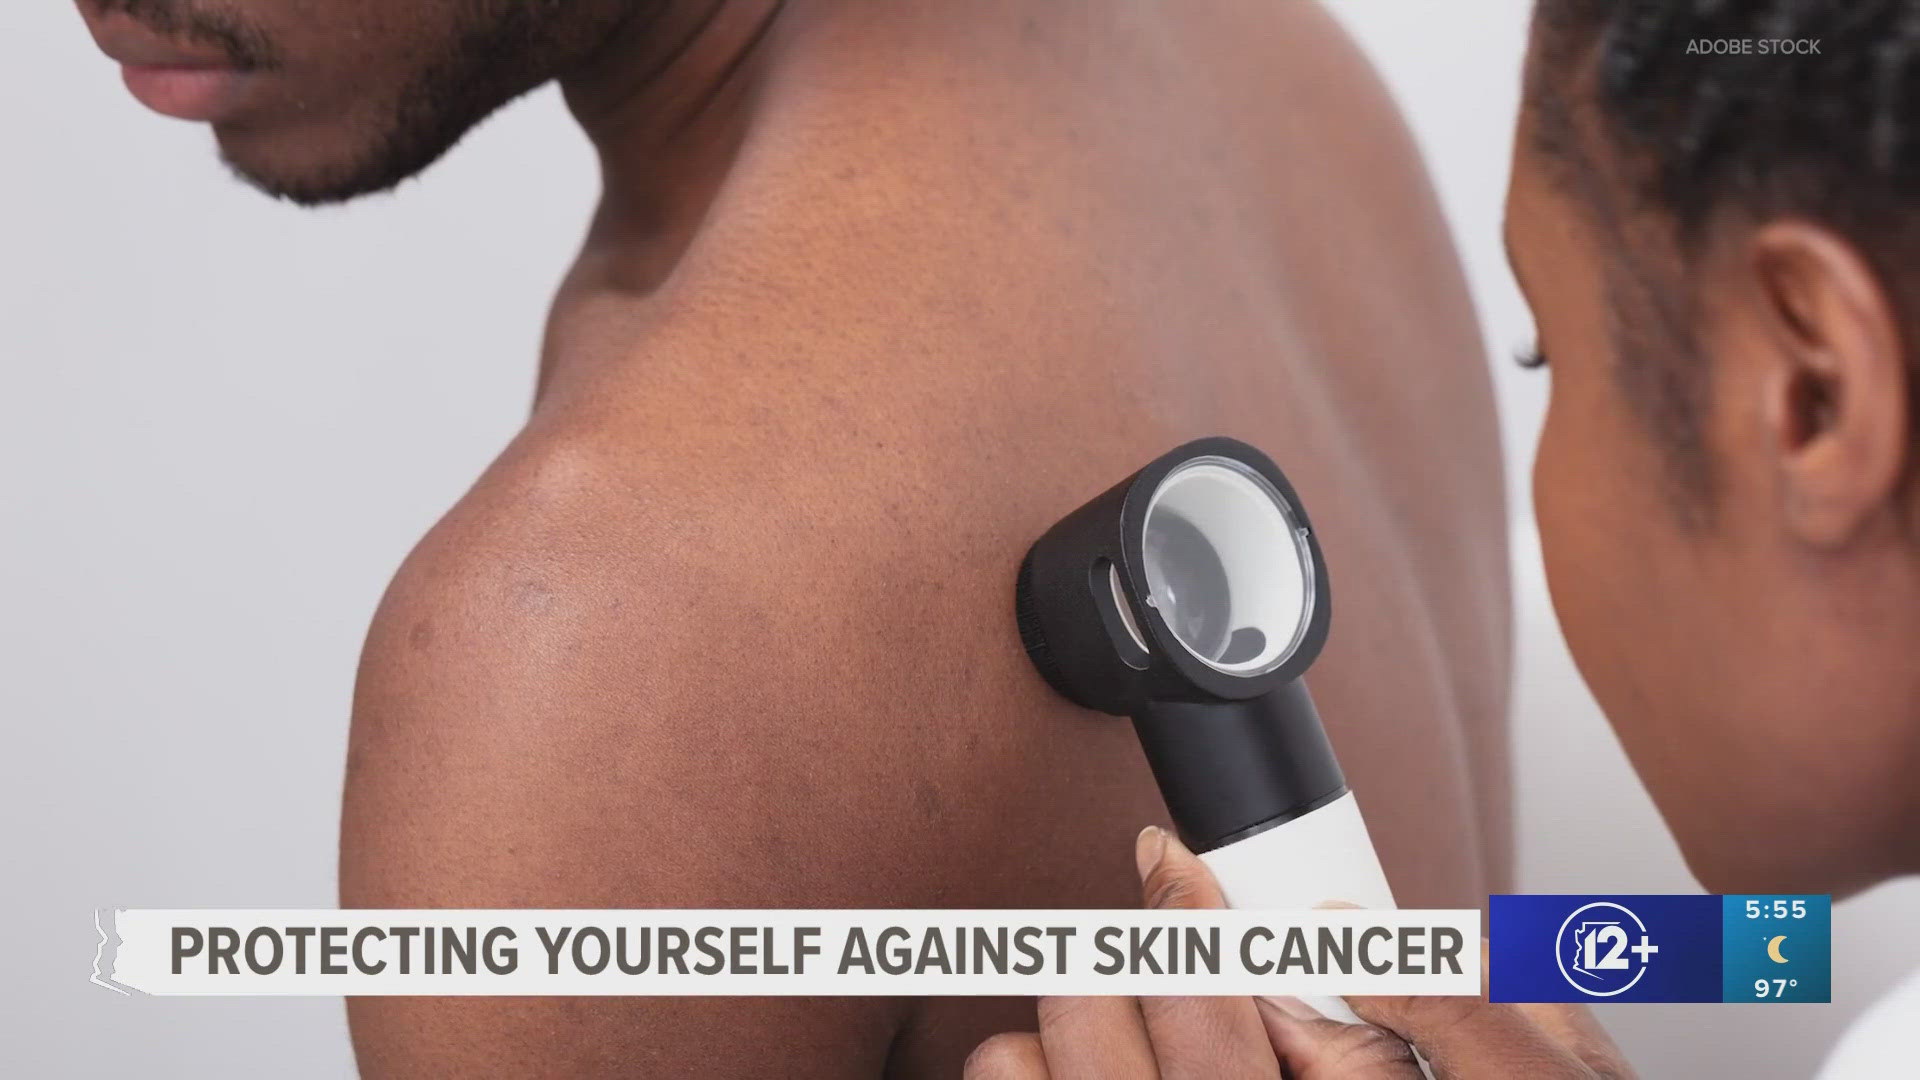 It's a perpetual myth that people with darker skin tones cannot get skin cancer. They can, and it can be more fatal for them, experts say.